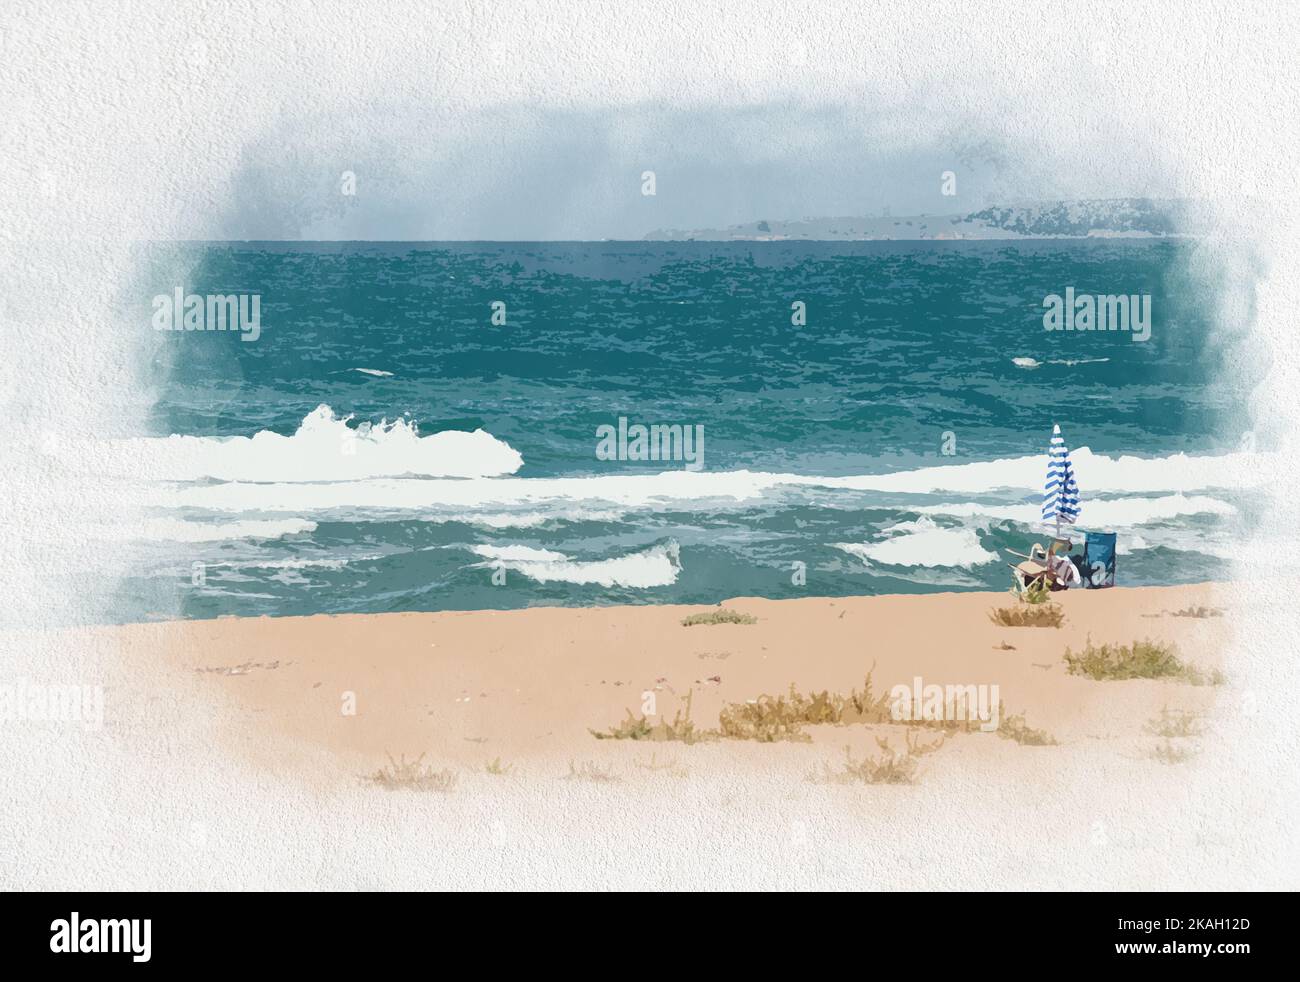 Watercolor painting idea concept on canvas. Rough sea, beach, parasol and chair. Peaceful environment view. Lazy day. Summer vibes. No people, nobody. Stock Photo